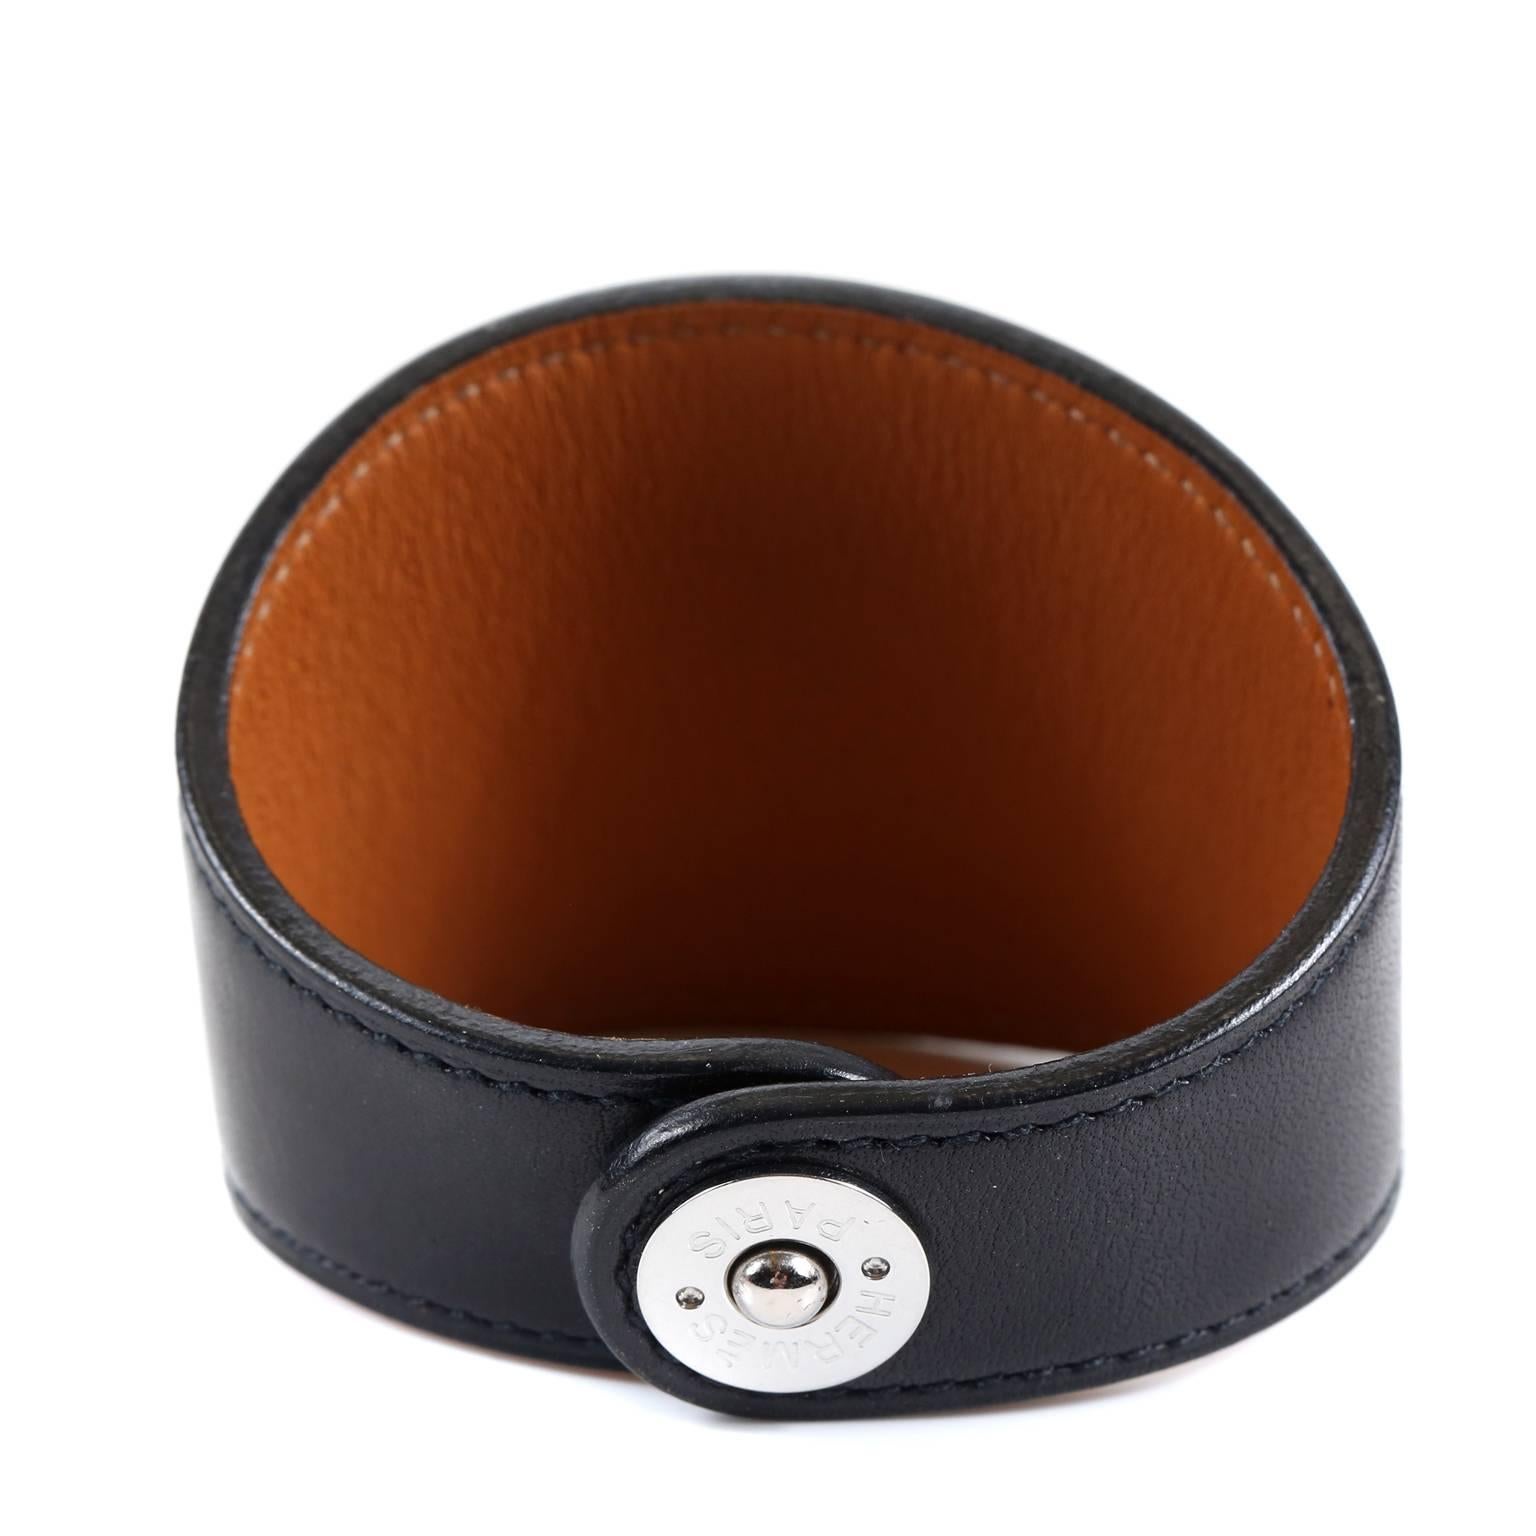 This authentic Hermès Black Leather Ex Libris Cuff Bracelet is pristine.  The simple design can be worn with anything year-round and is equally suitable for both men and women.  Black leather wide cuff has stamped imprint of Ex Libris design- iconic